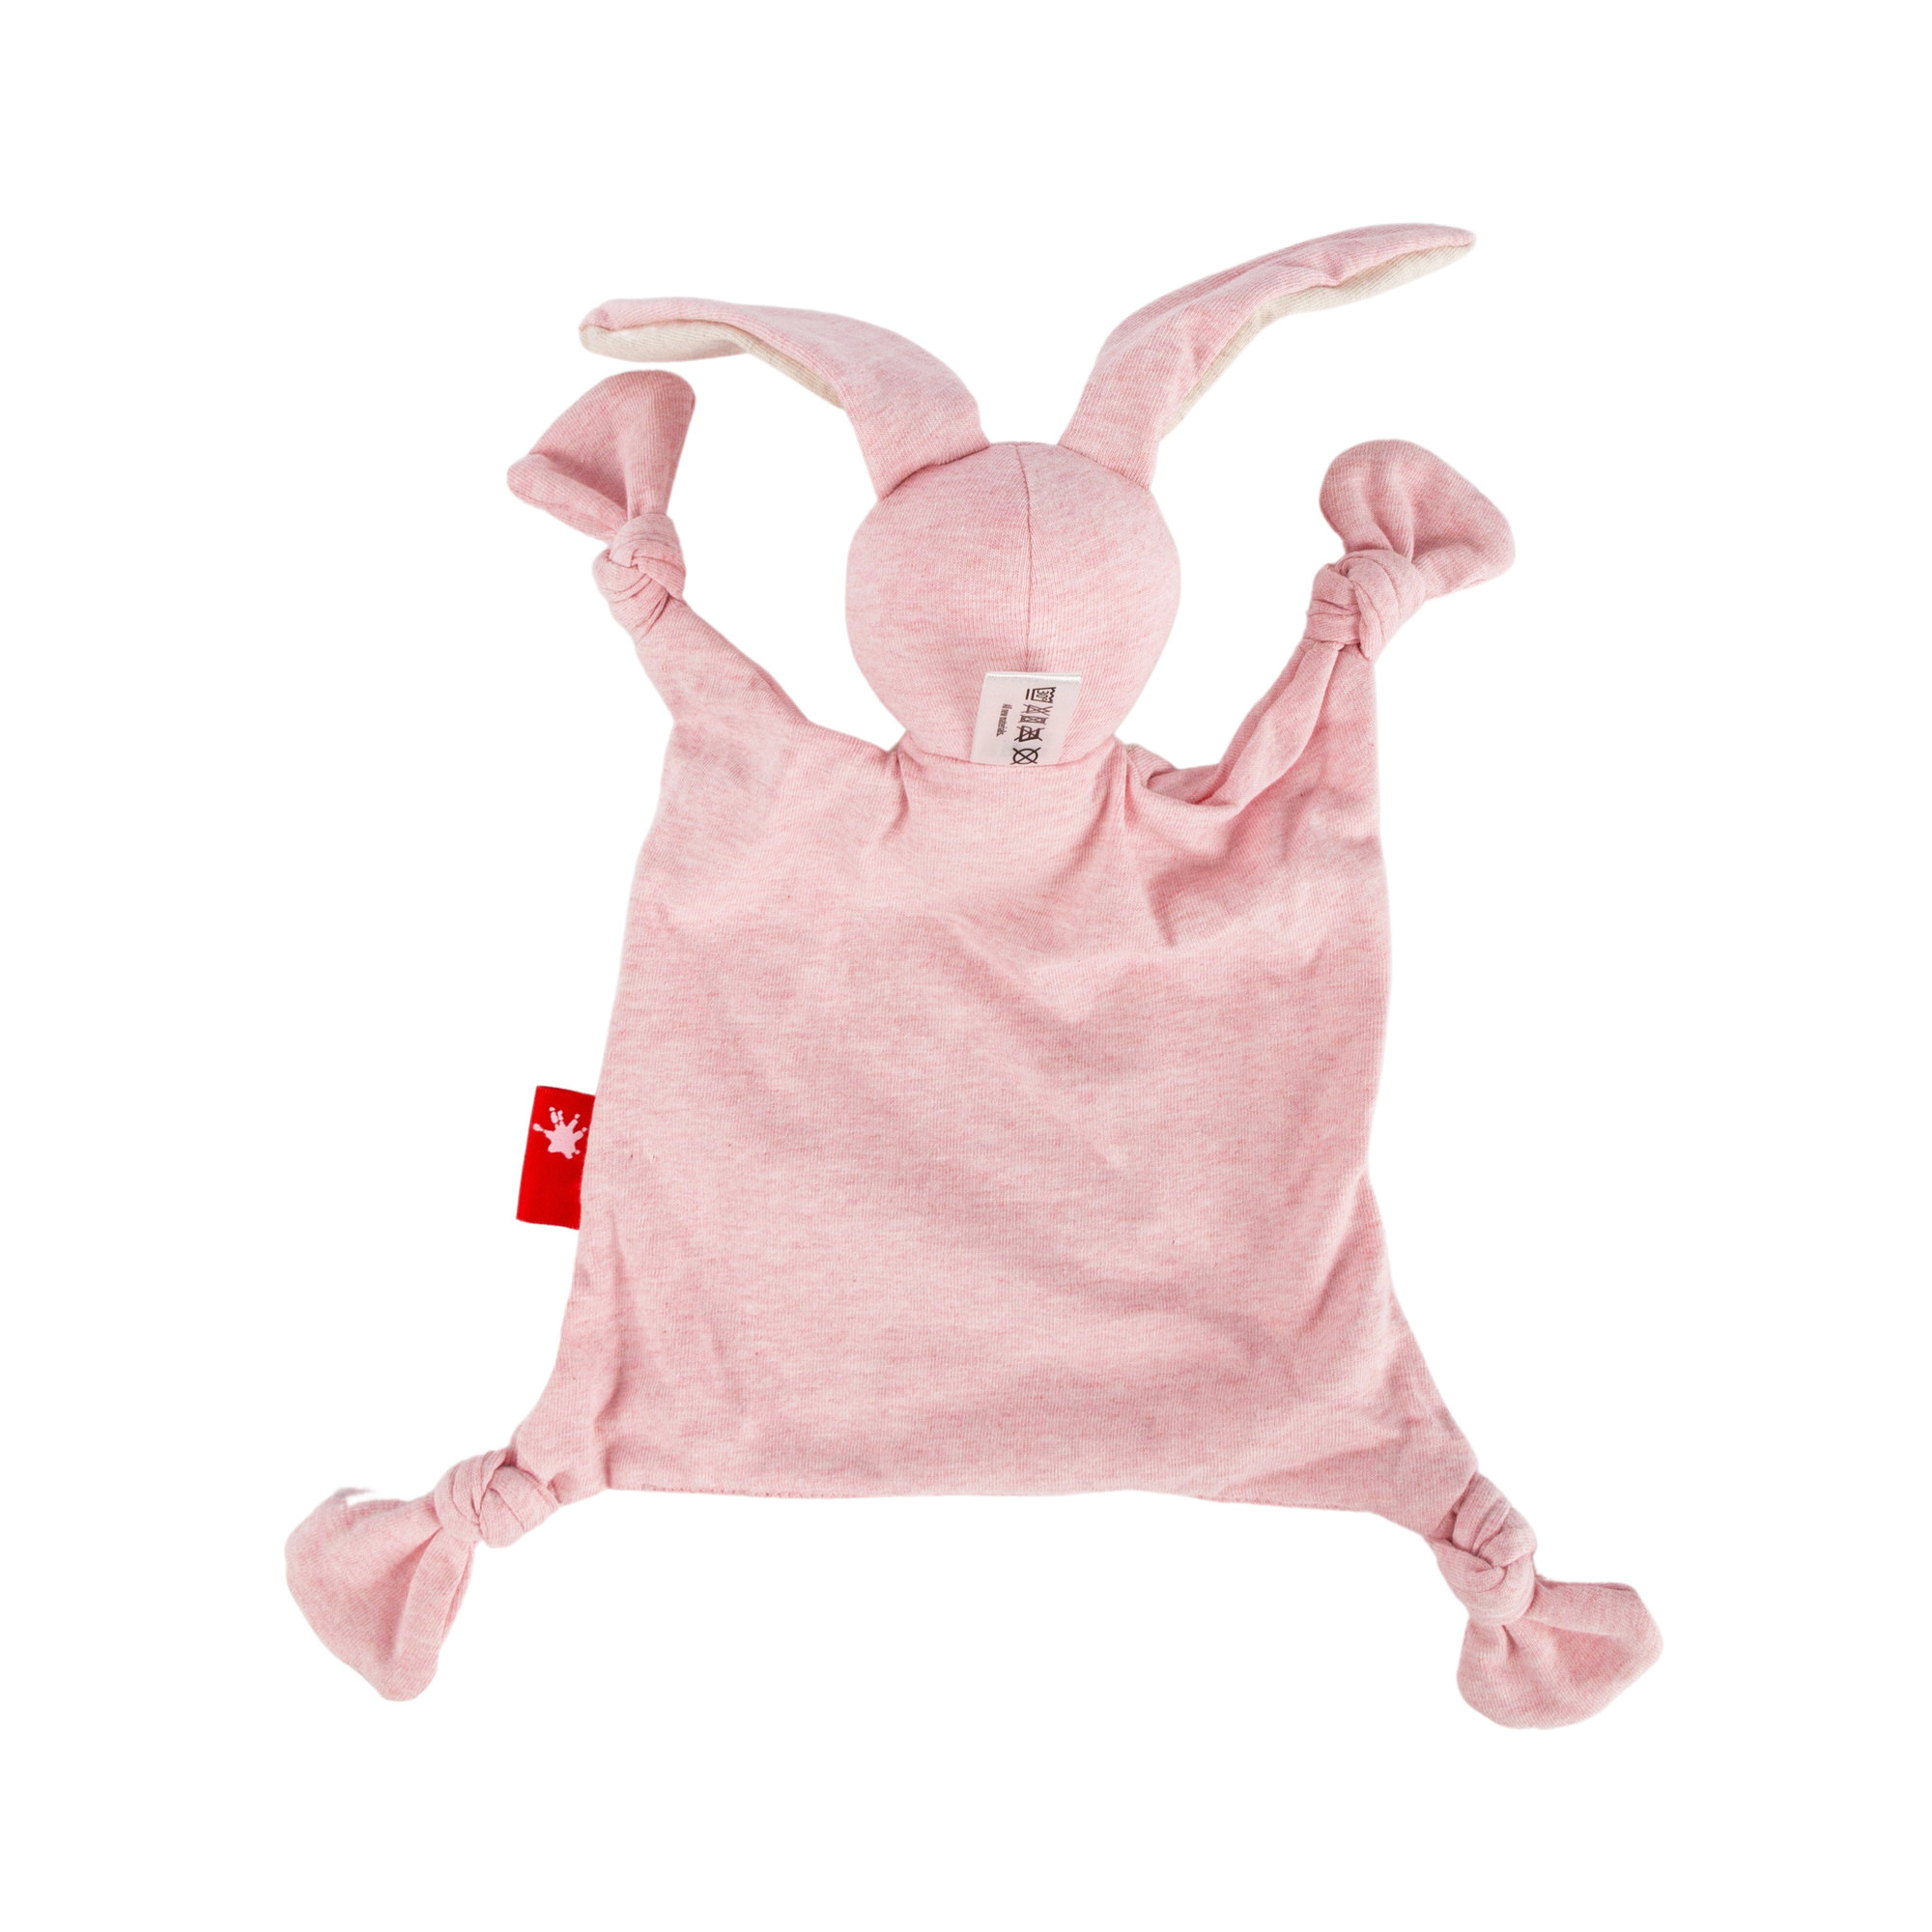 Baby lovey bunny, pink marl